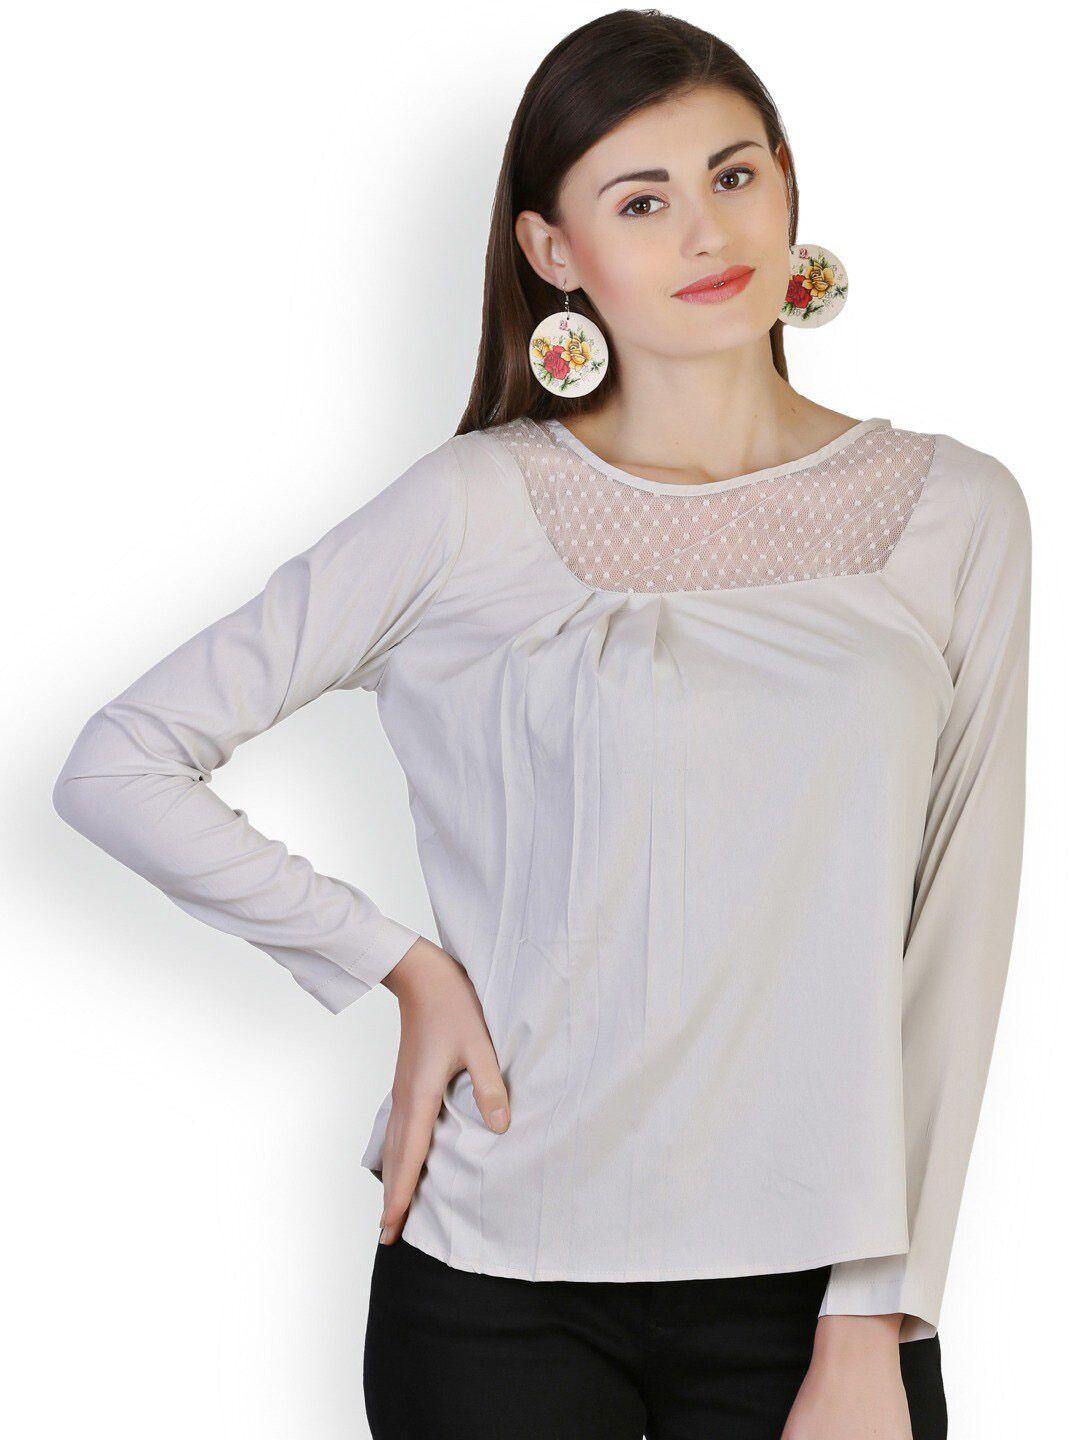 baesd round neck lace inserts regular top